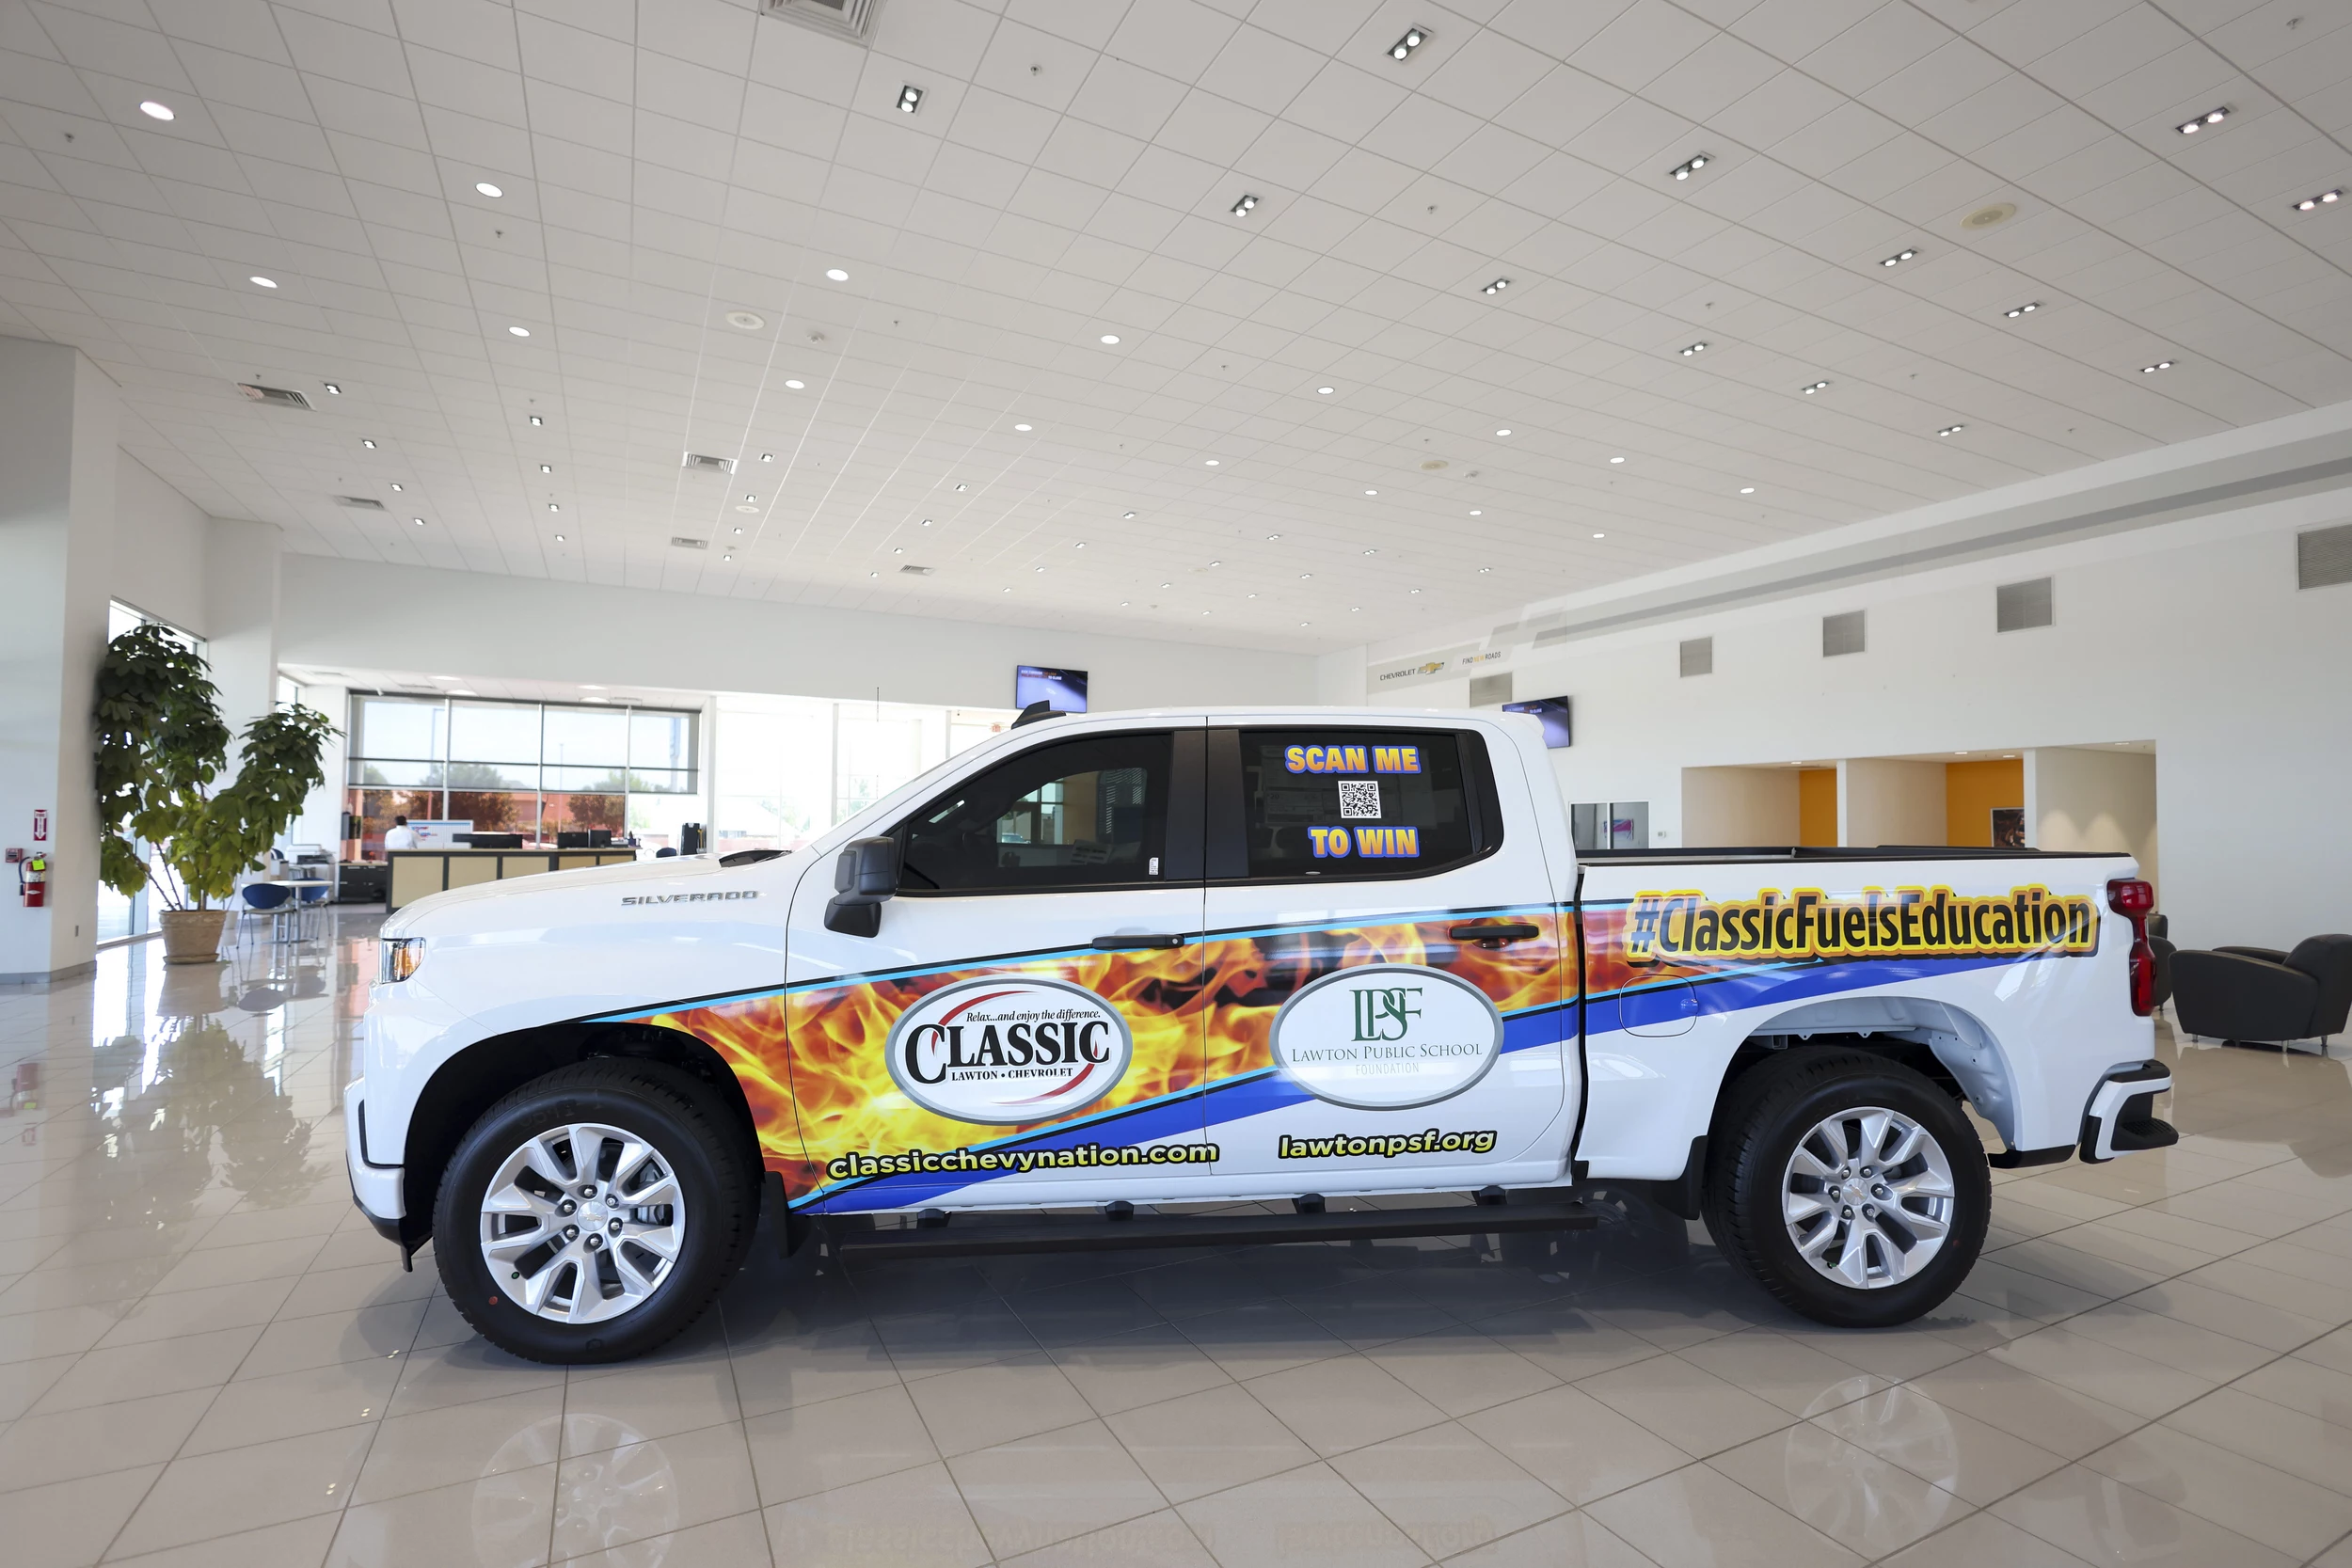 Win a 2022 Chevy Silverado and help LPS Foundation